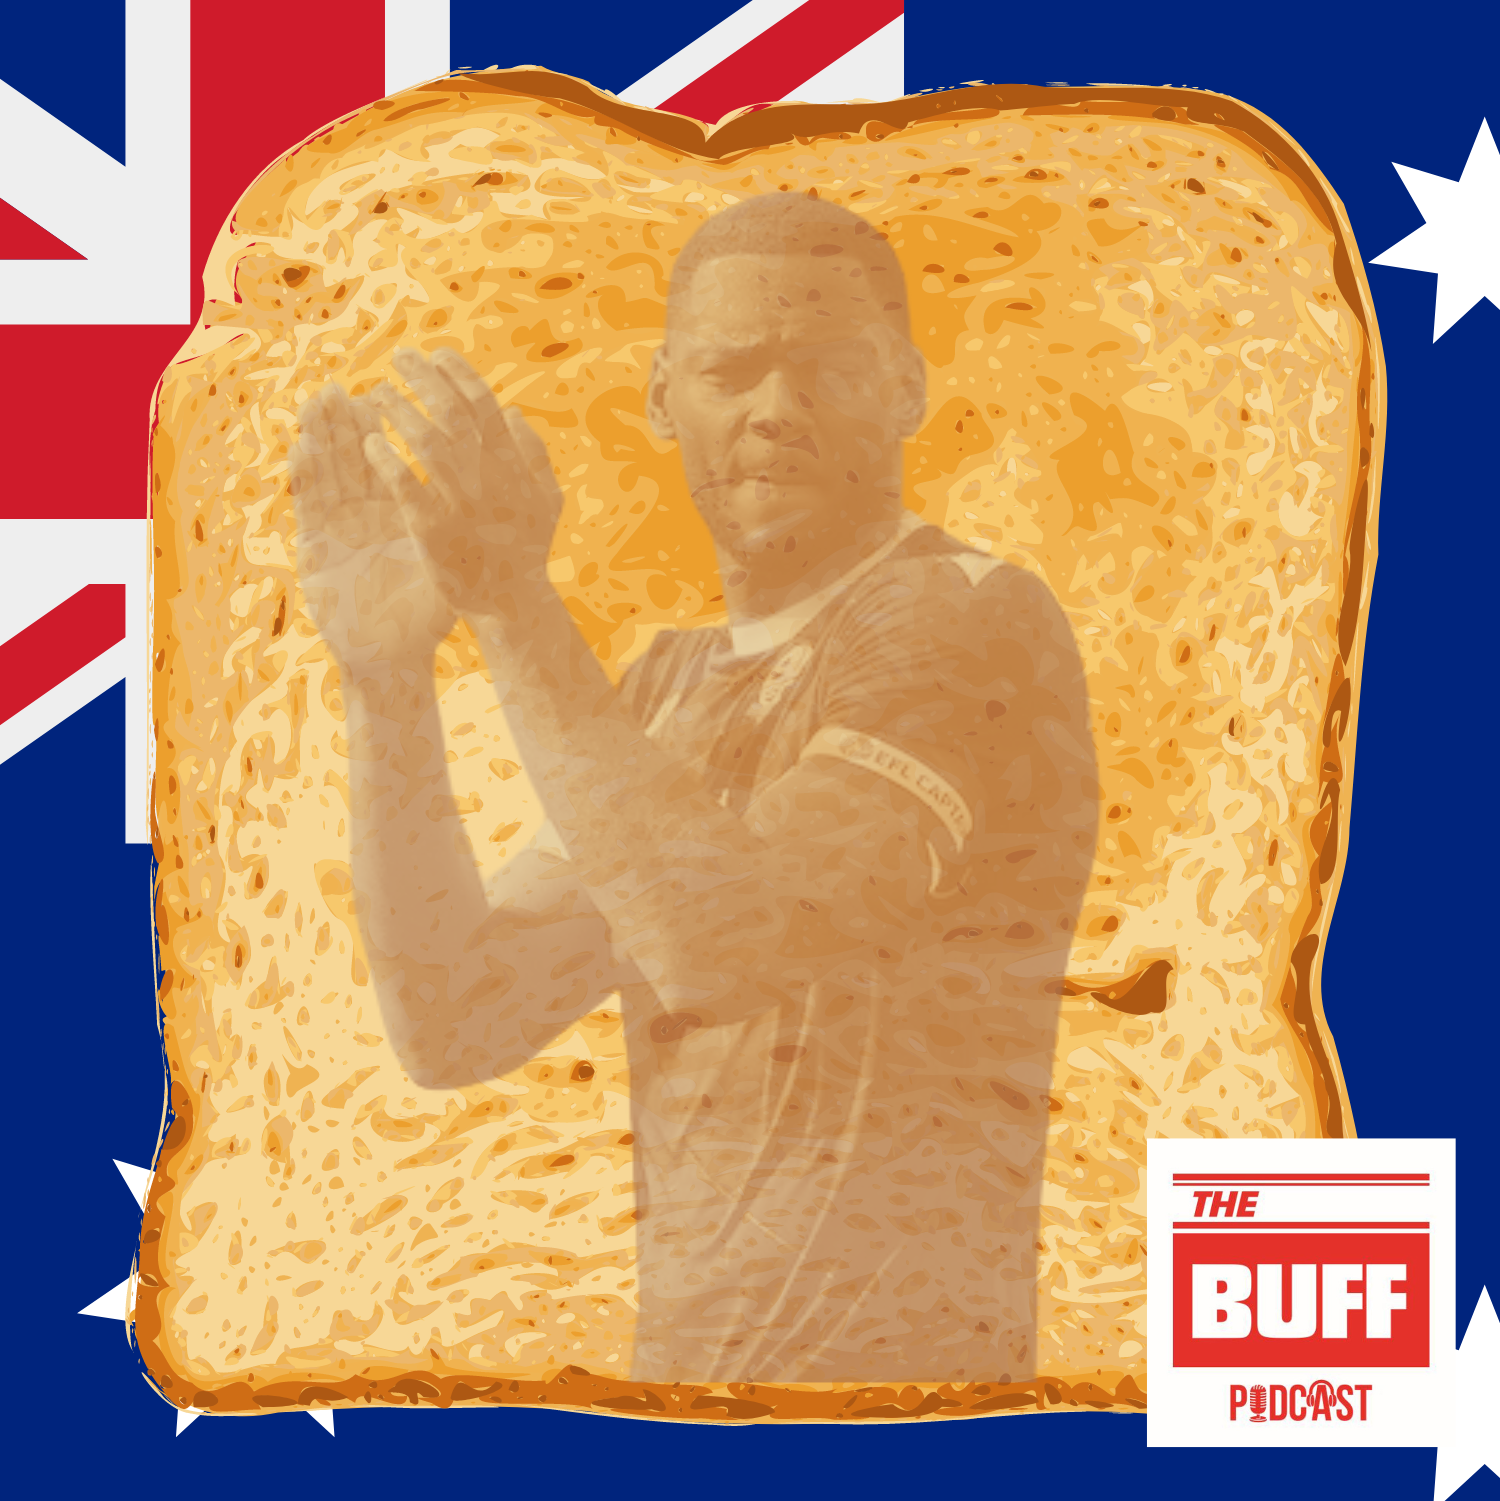 Four wins in a row, you say? A piece of toast...